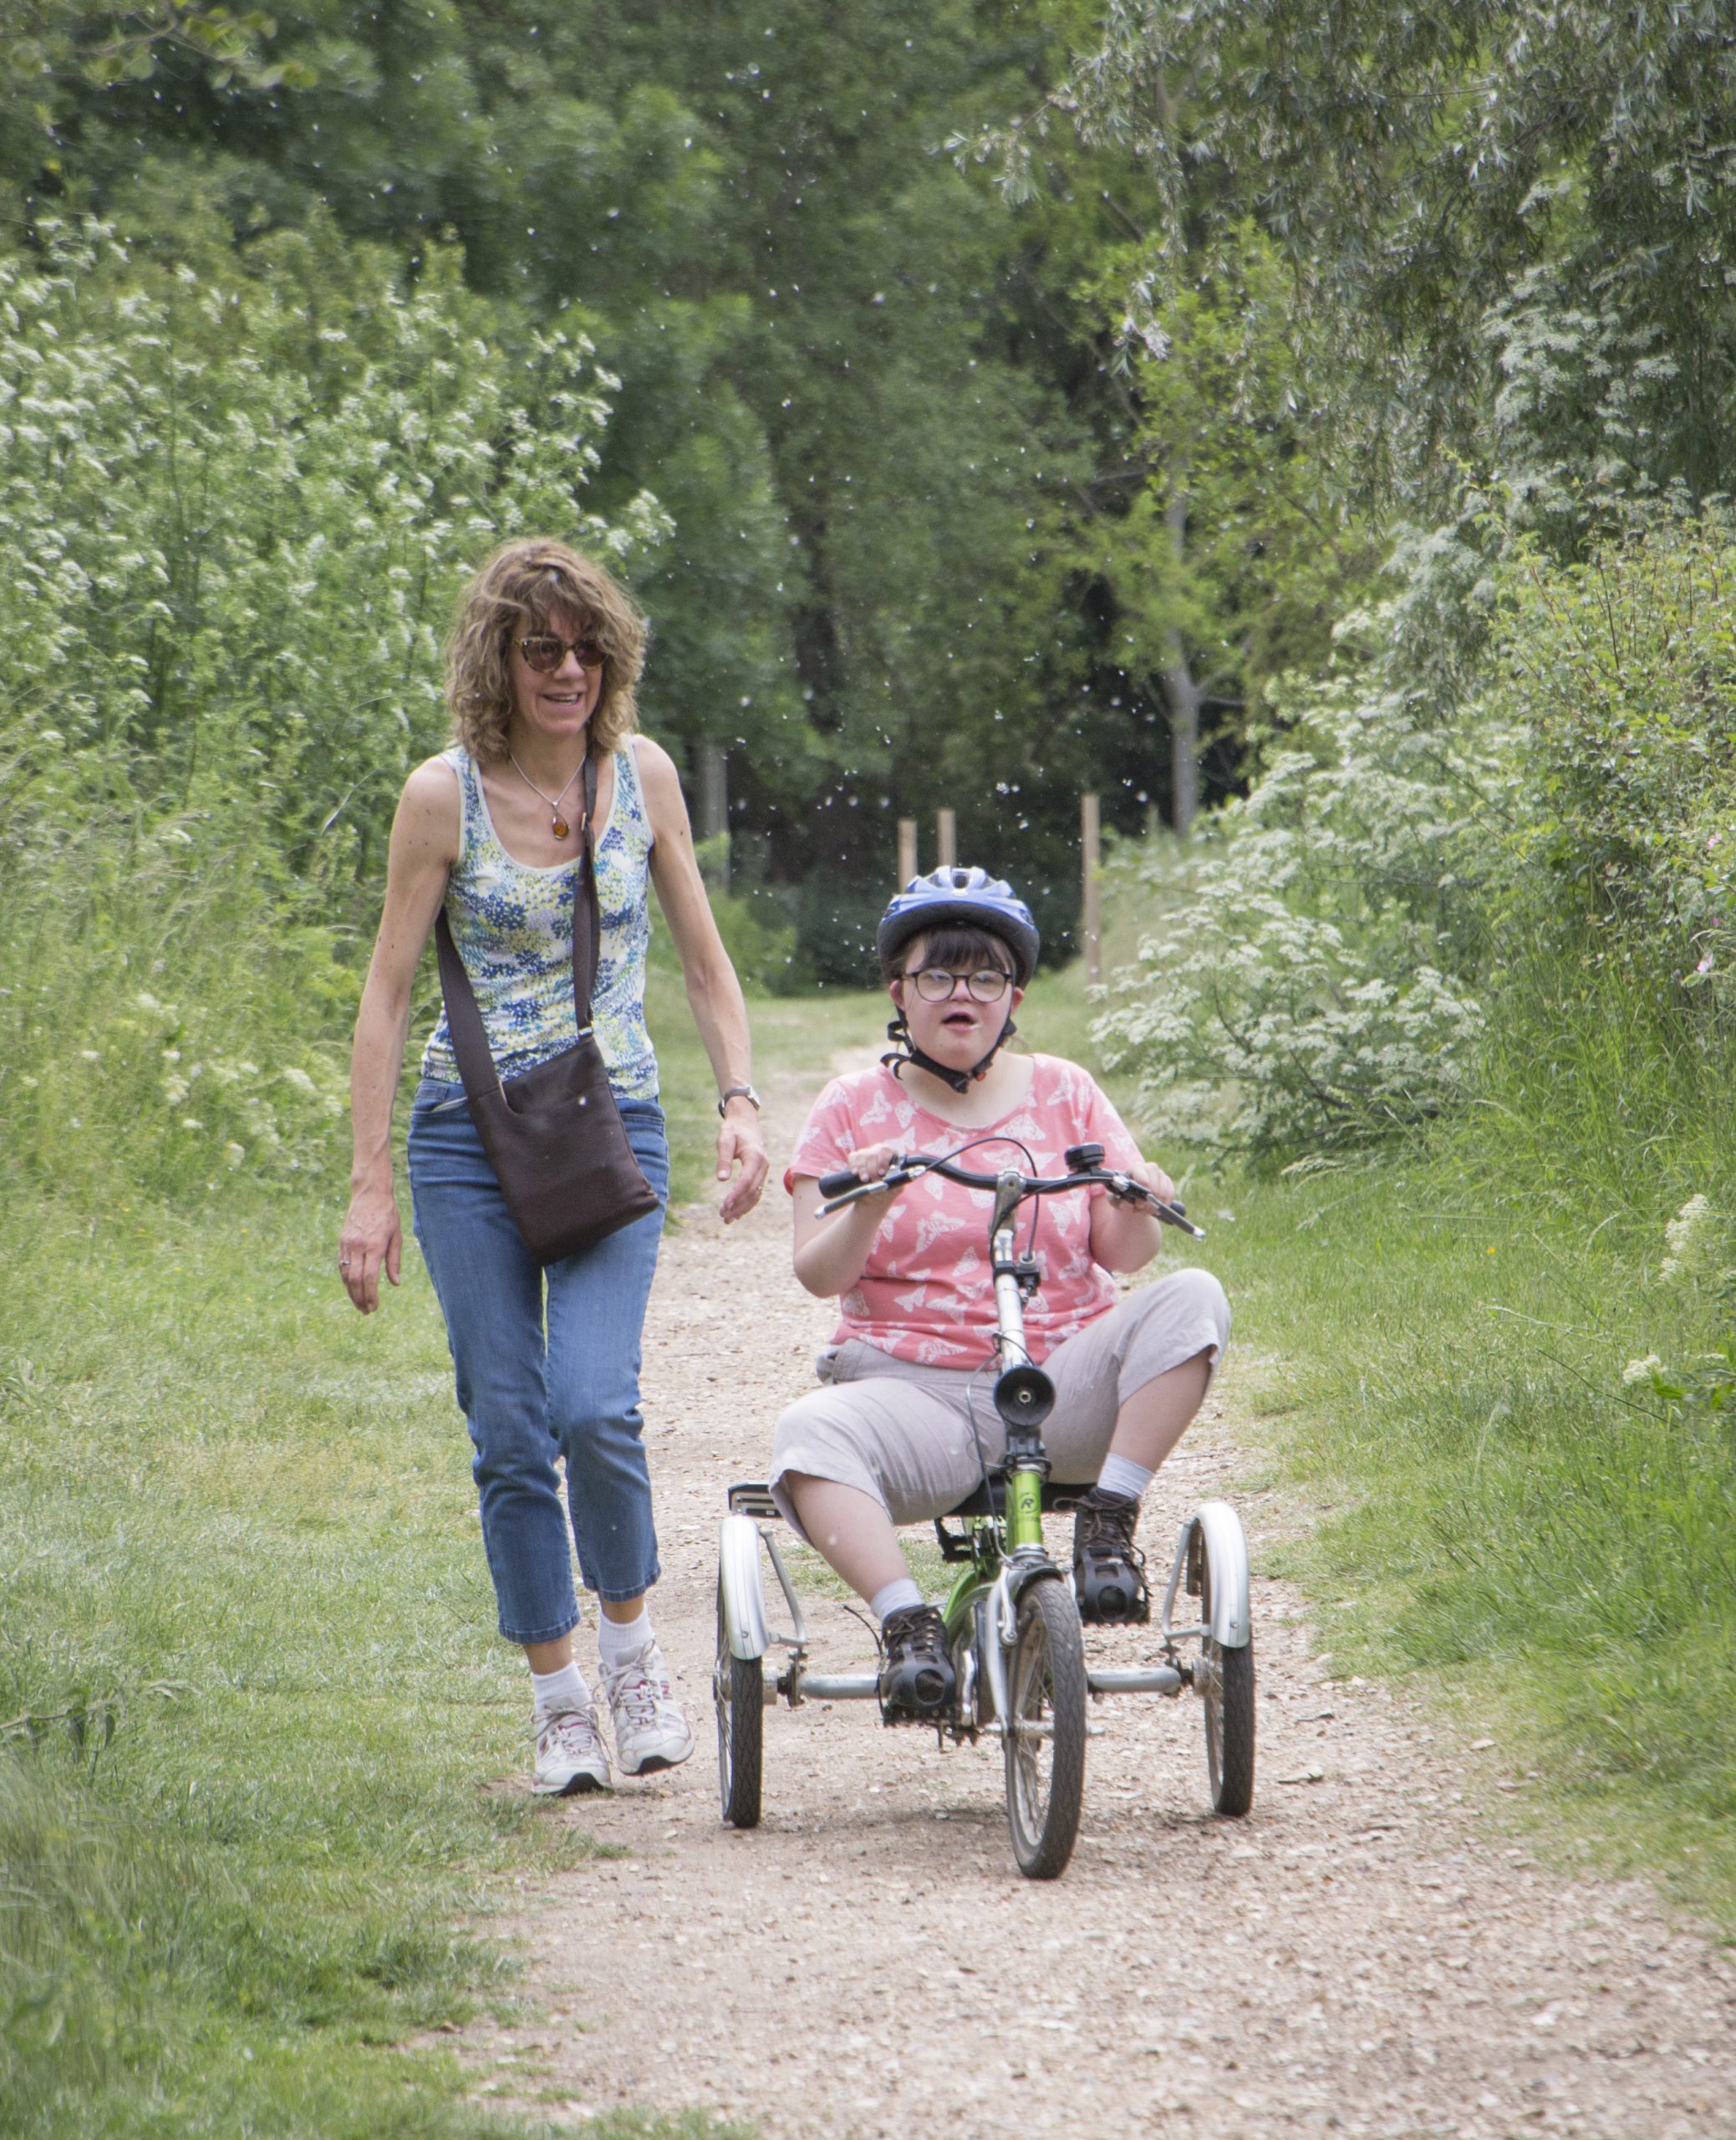 Young cyclist using adapted cycle as her mother walks behind